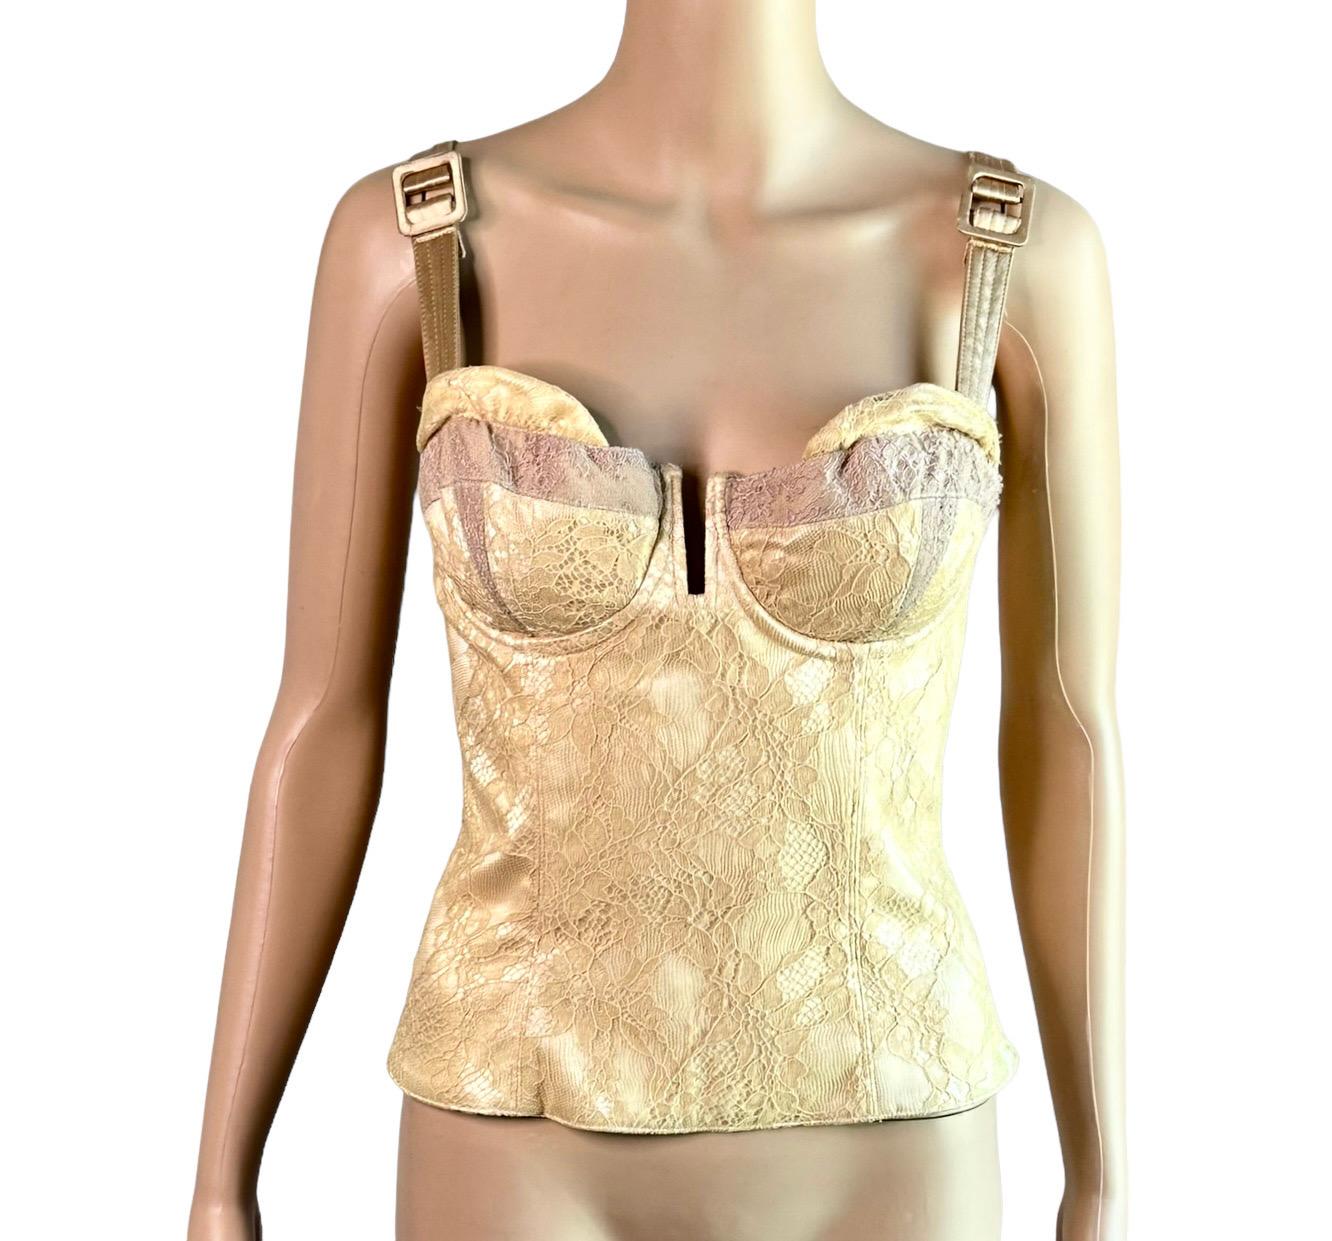 Christian Dior By John Galliano S/S 2004 Runway Bustier Lace Corset Crop Top For Sale 1